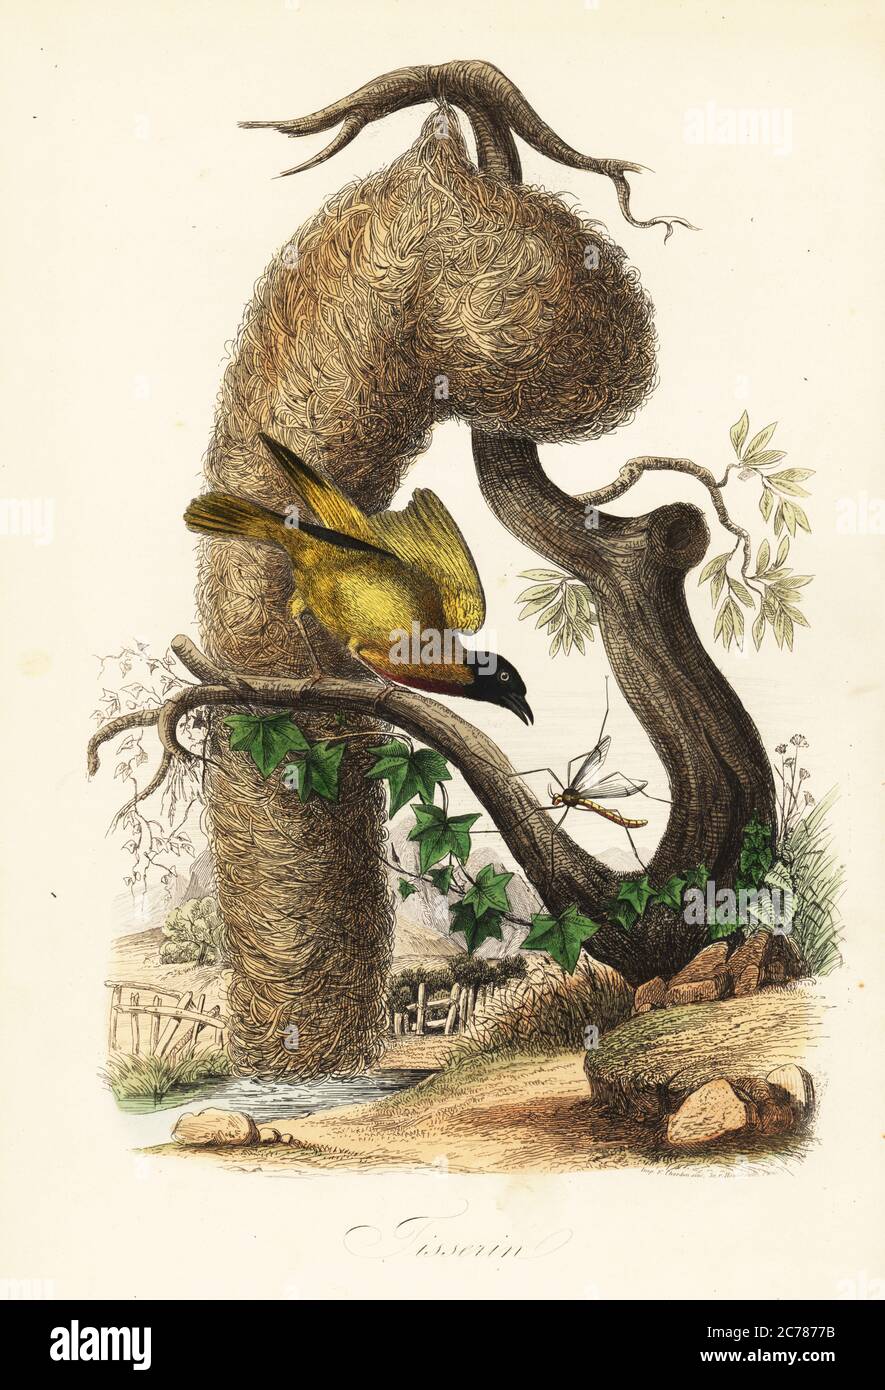 Village weaver, Ploceus cucullatus, with nest of woven grass. Tisserin. Copied from an illustration in Felix-Edouard Guerin-Meneville's Dictionnaire Pittoresque d'Histoire Naturelle. Handcoloured steel engraving printed by F. Chardon from Achille Comte’s Musee d’Histoire Naturelle, Museum of Natural History, Gustave Hazard, Paris, 1854. Stock Photo